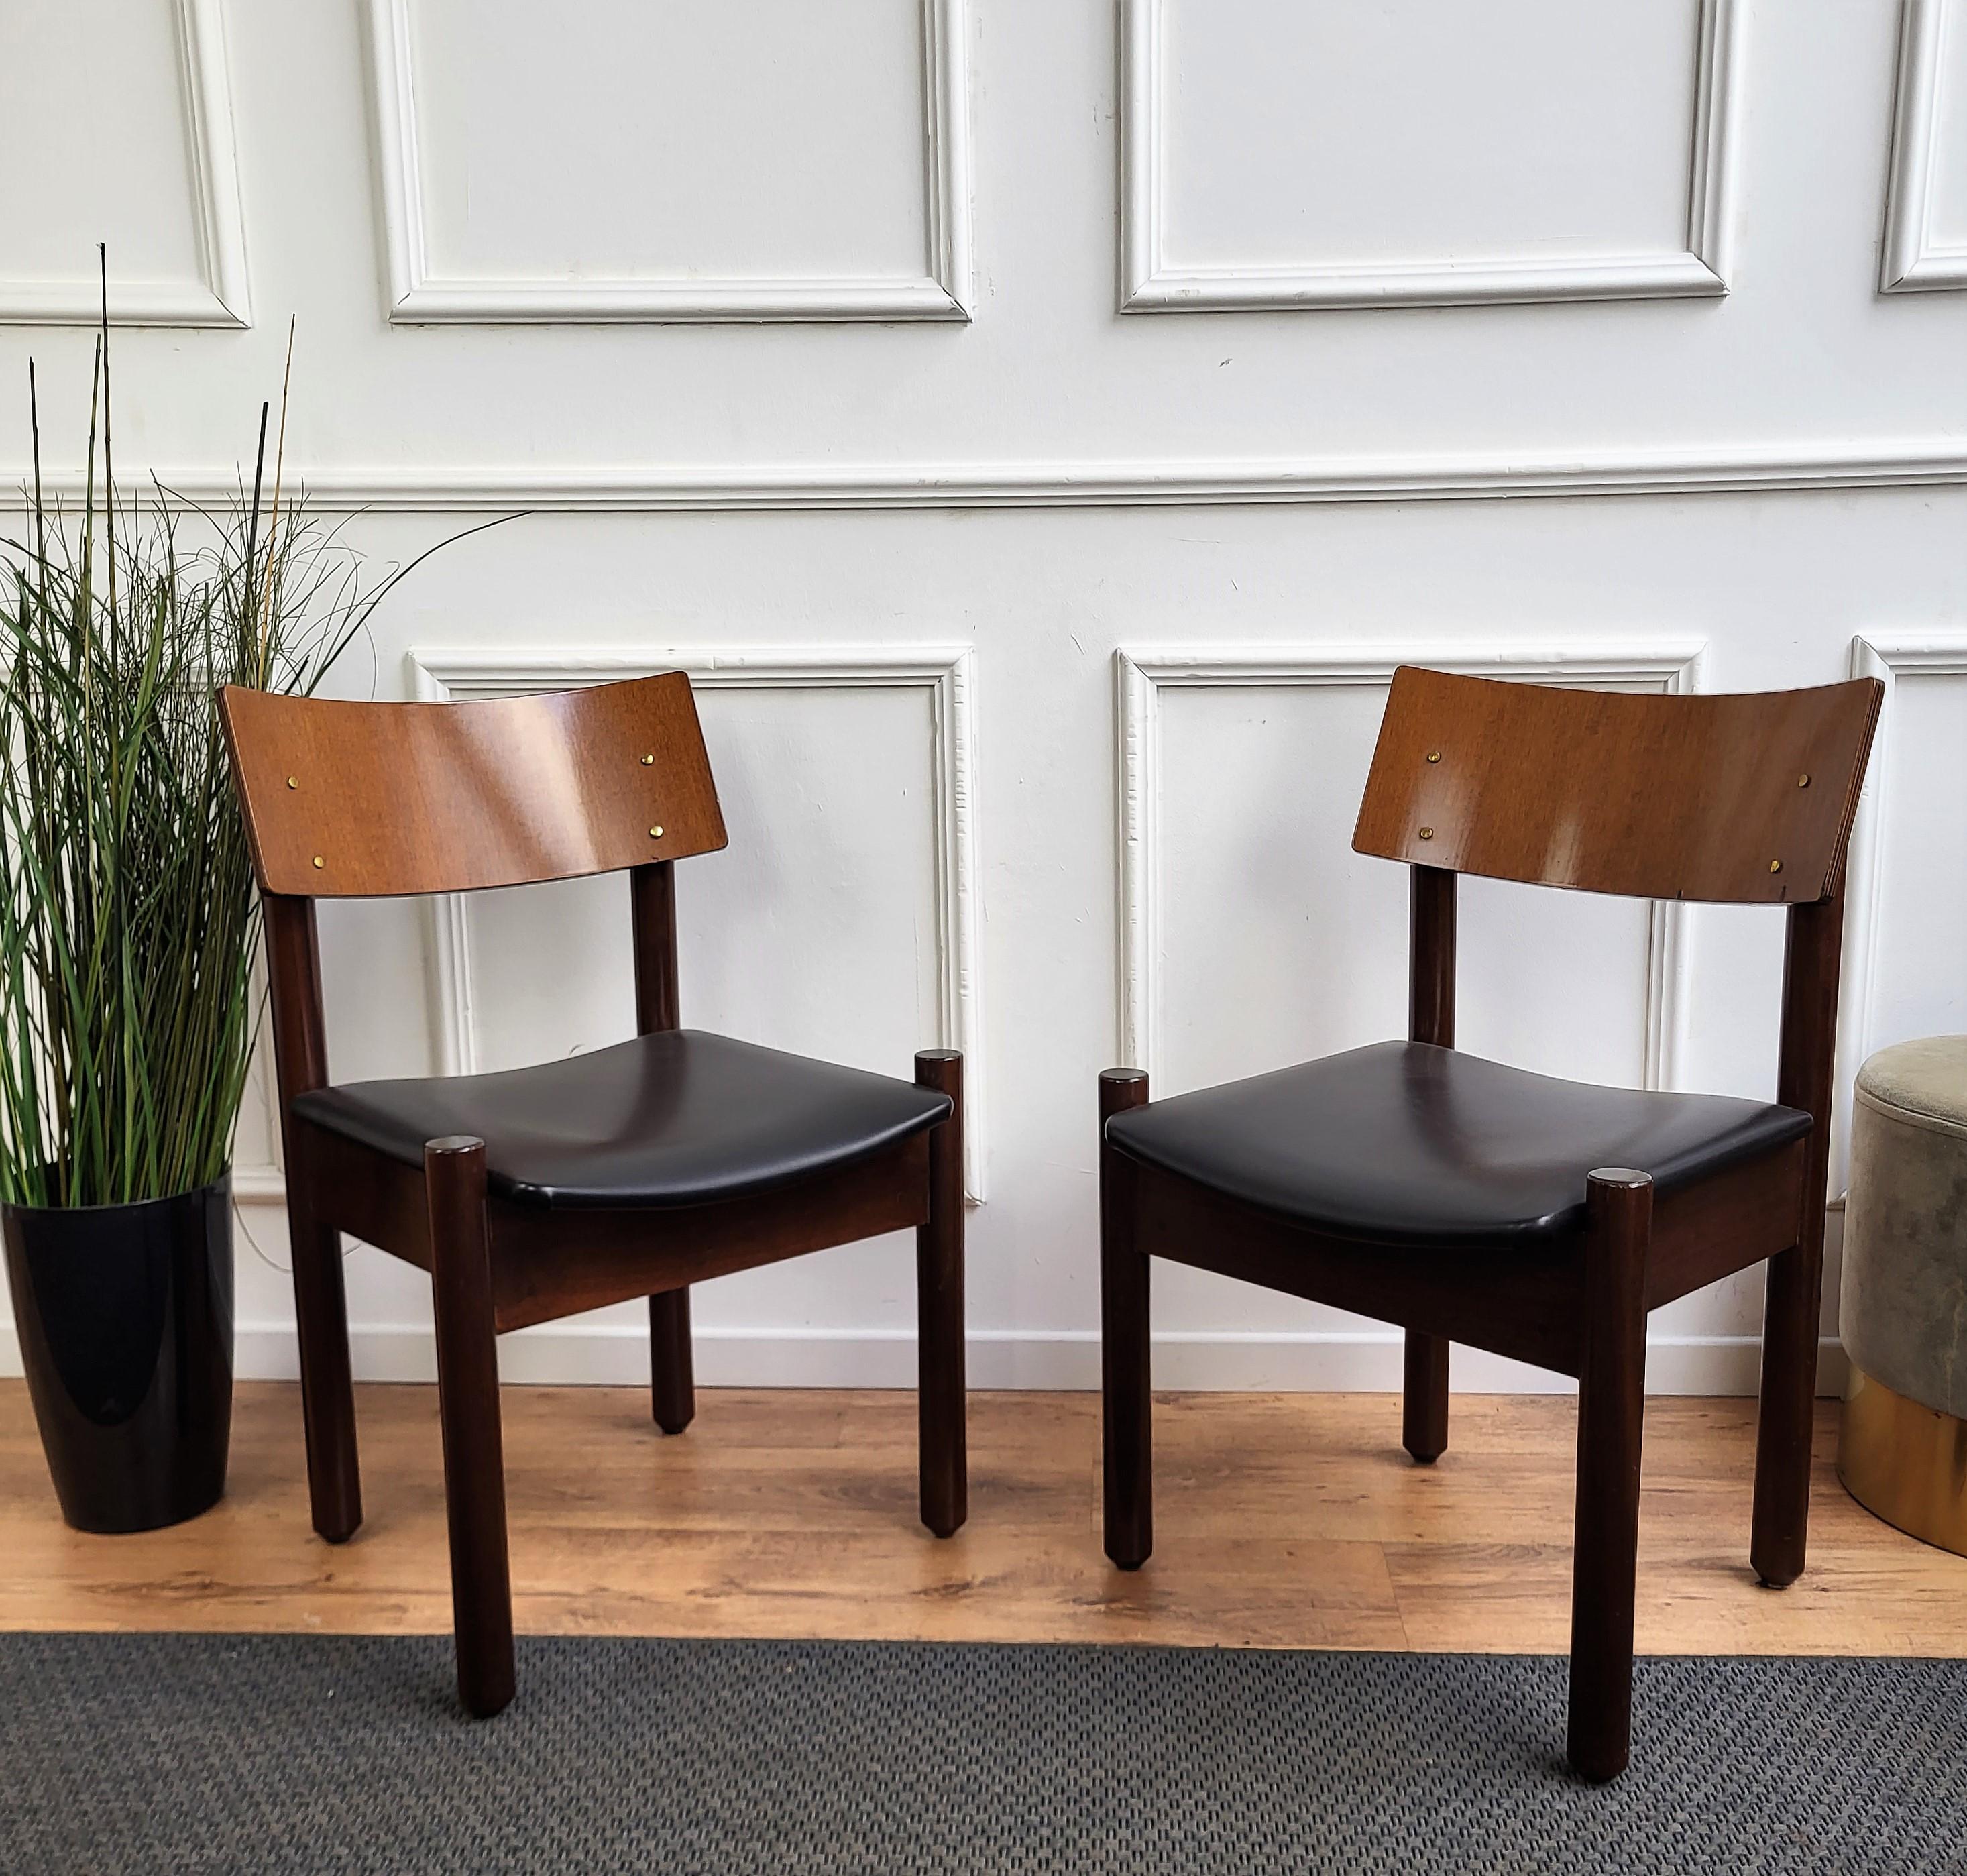 Beautiful and stylish Italian Mid-Century Modern set of 6 dining chairs, with greatly worked and shaped wooden structure and black upholstered seat. The unique and typical design, with the clean geometric shape and decoration enrich the natural